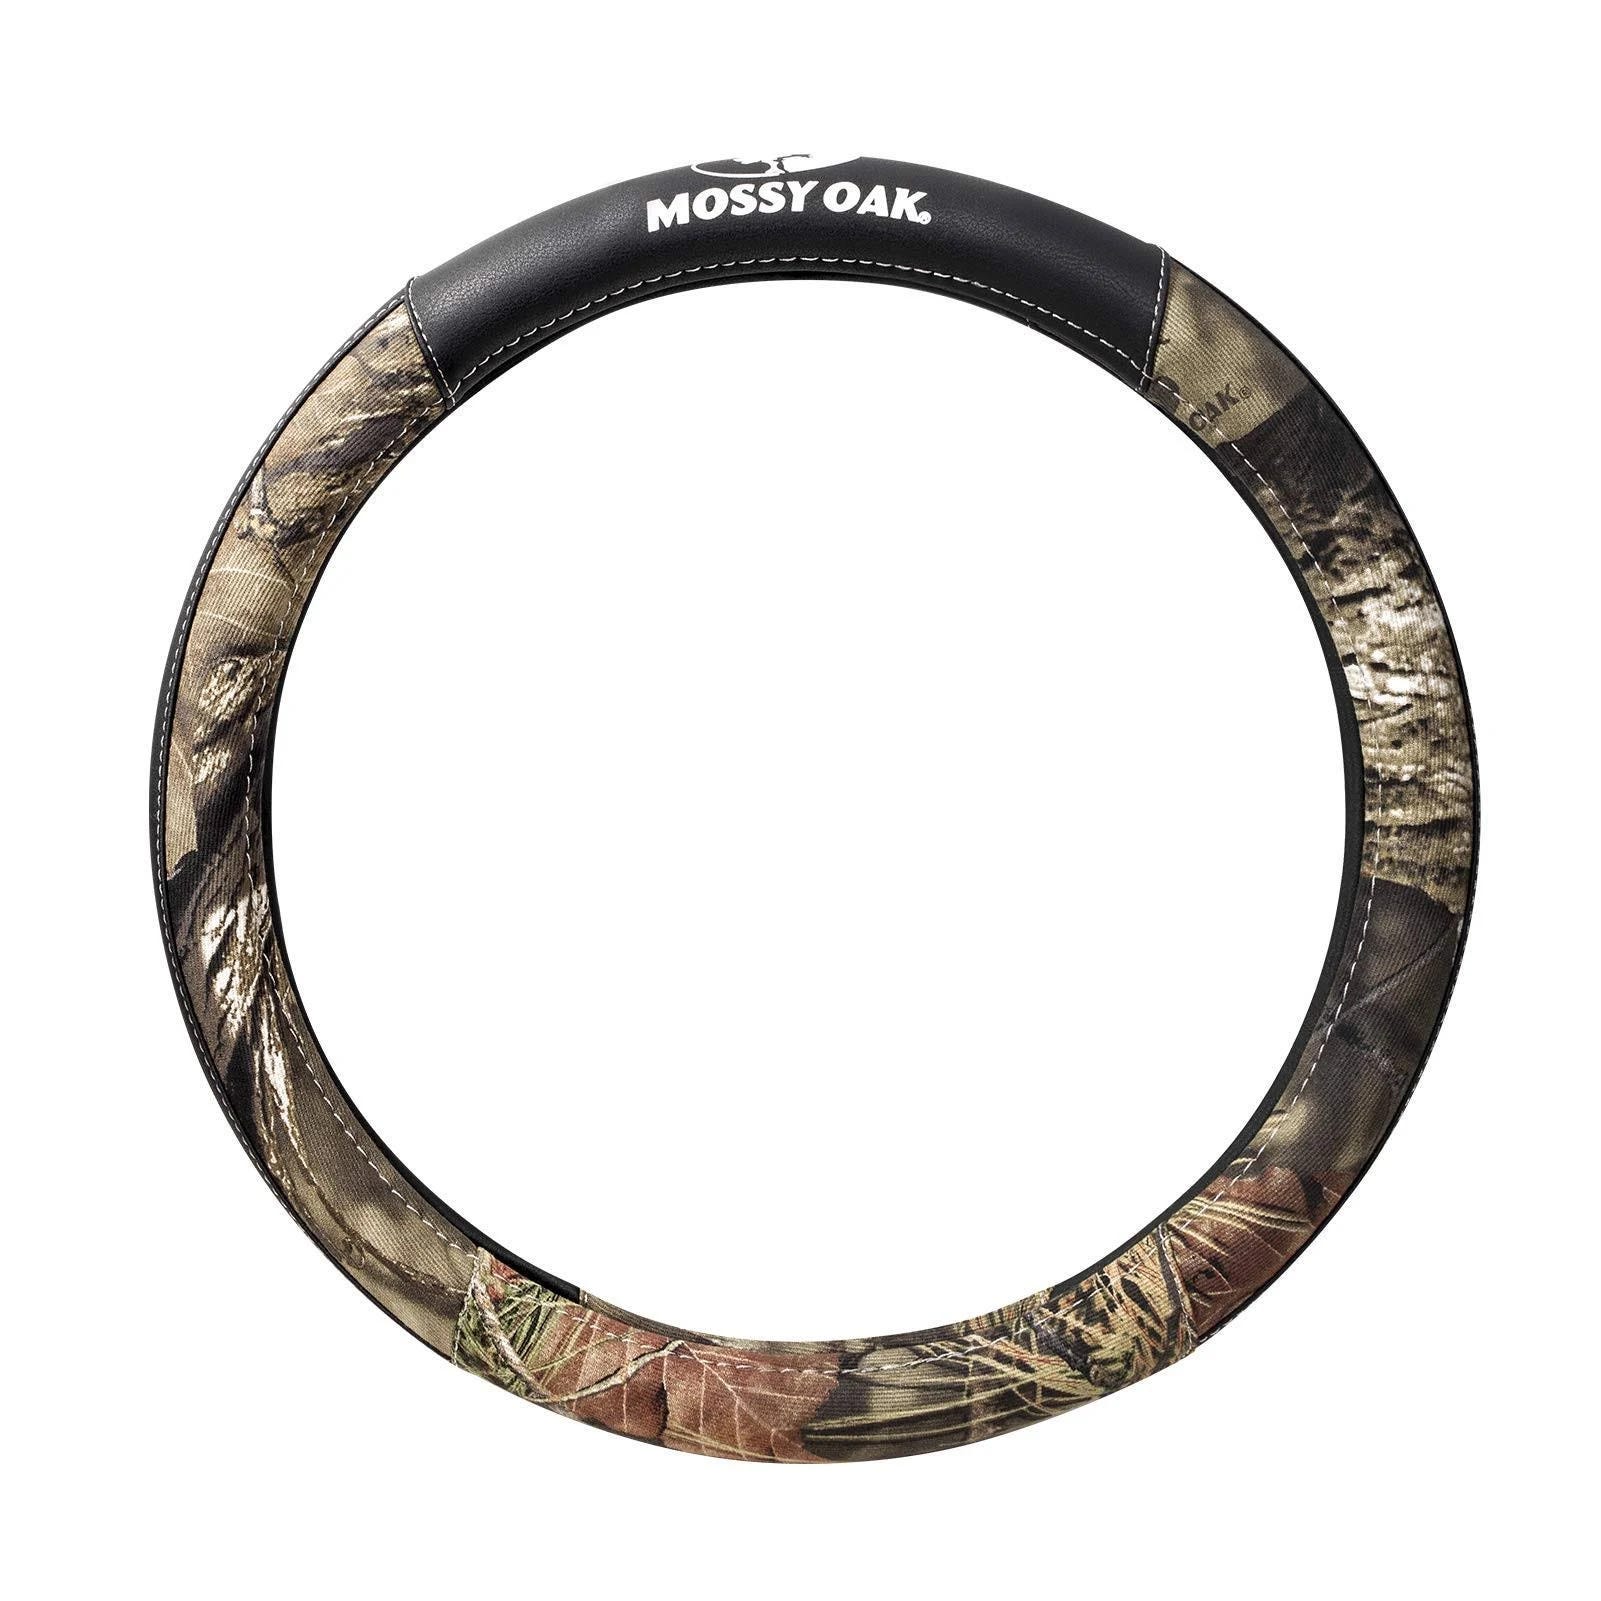 Mossy Oak Camo Steering Wheel Cover Universal Fit | Image